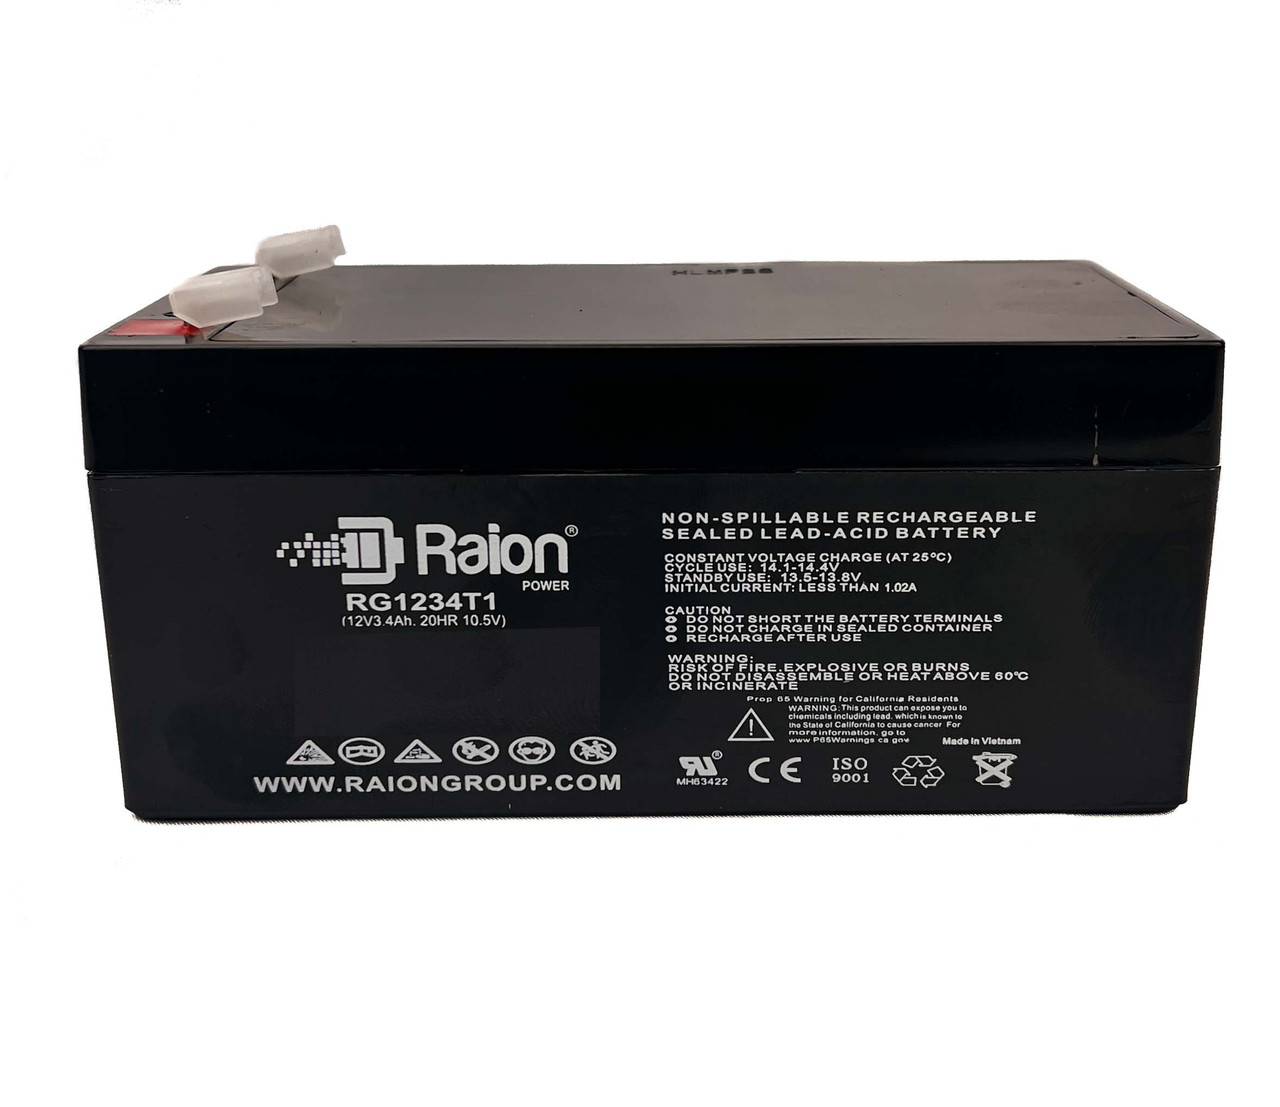 Raion Power RG1234T1 Rechargeable Compatible Replacement Battery for Leader CT3.2-12